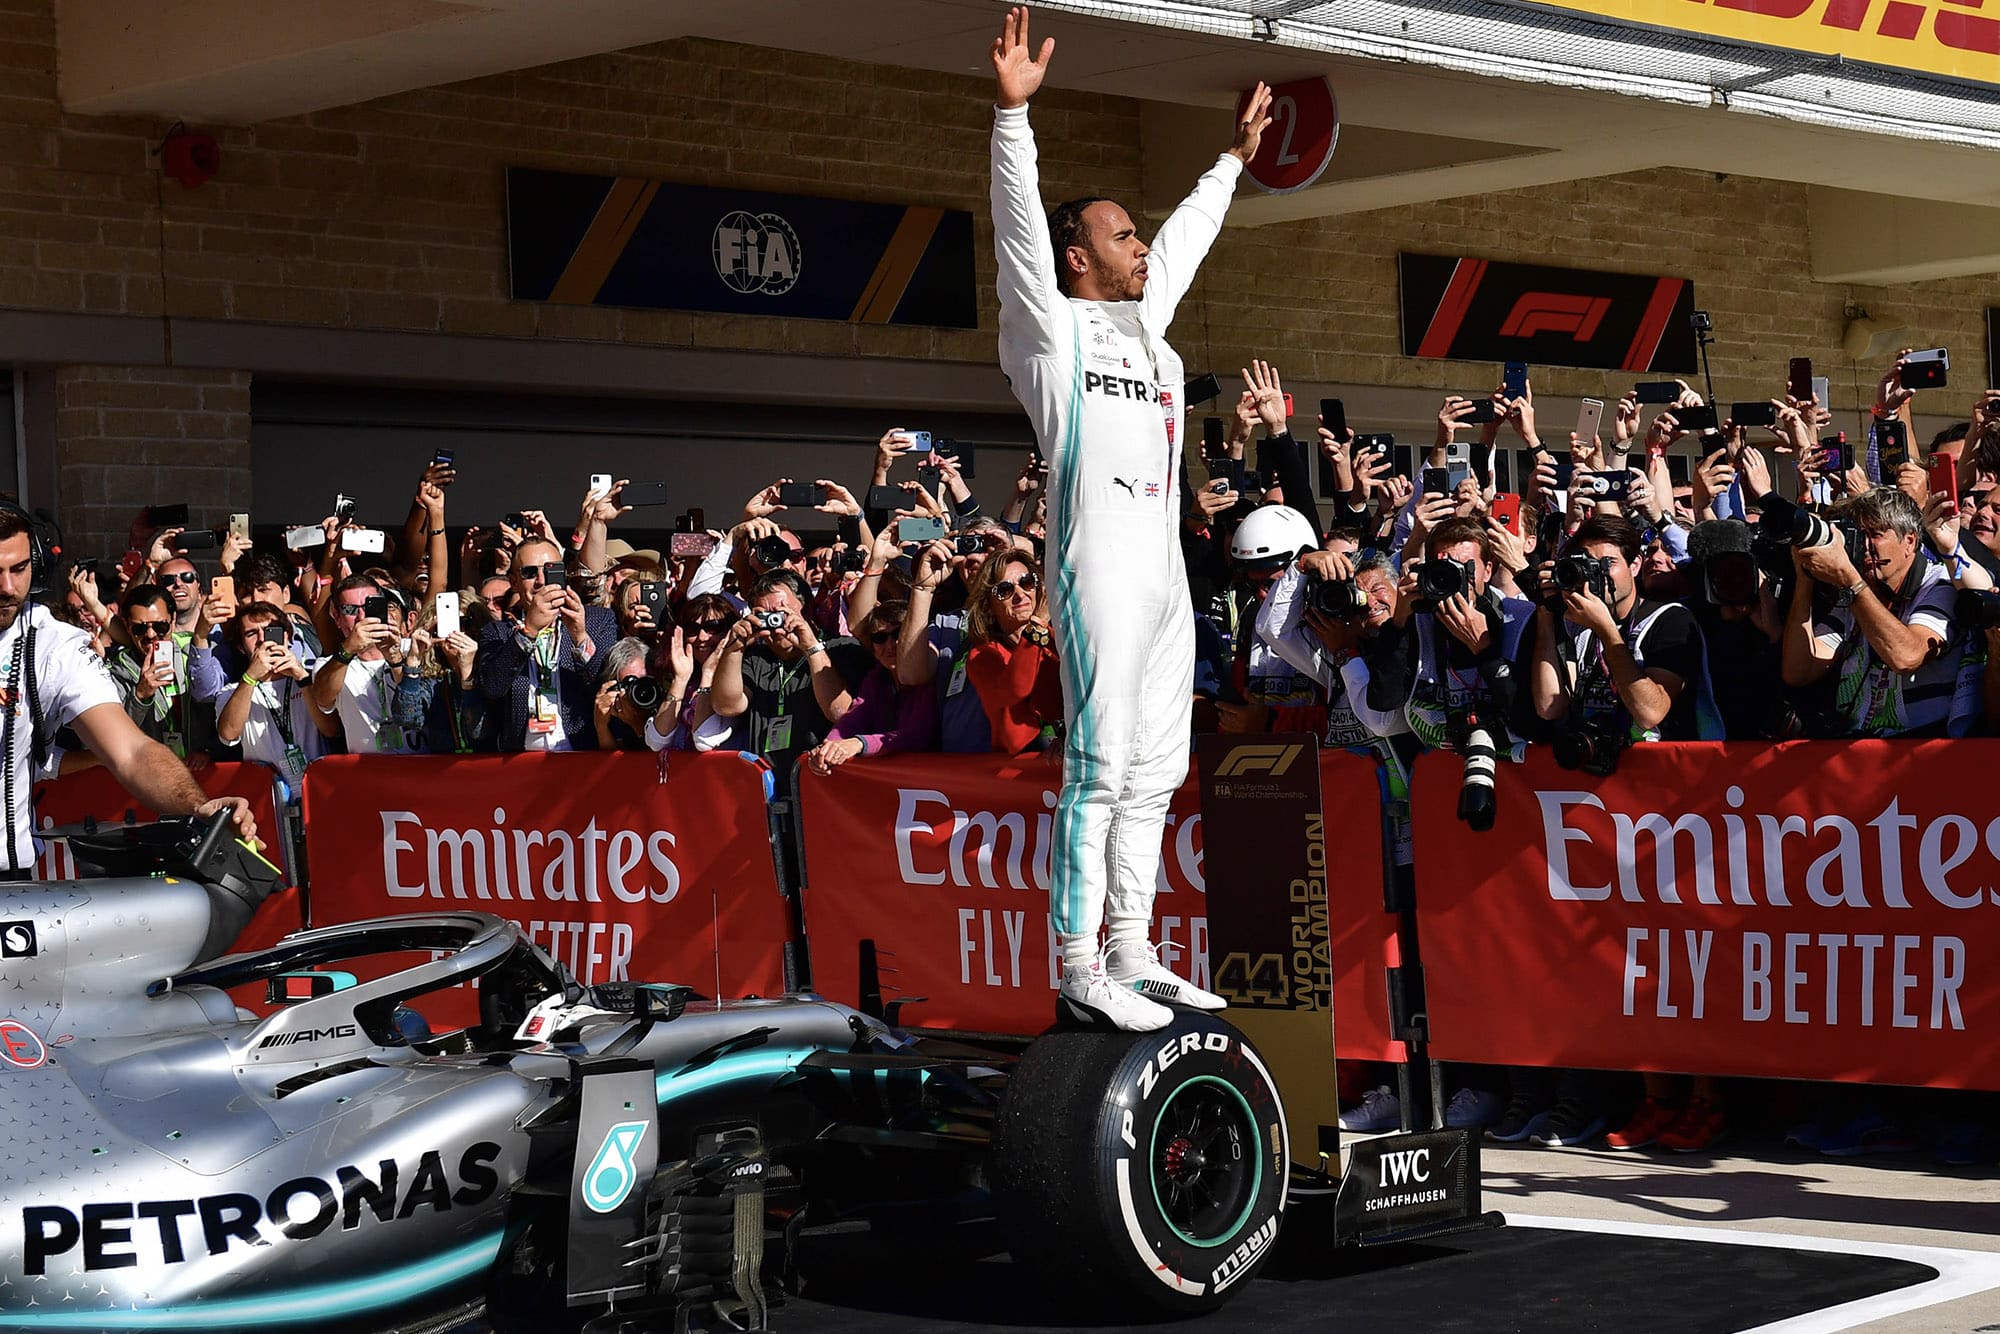 Lewis Hamilton stands on his car and raises his arms to the crowd after winning the 2019 F1 World Championship at the US GP